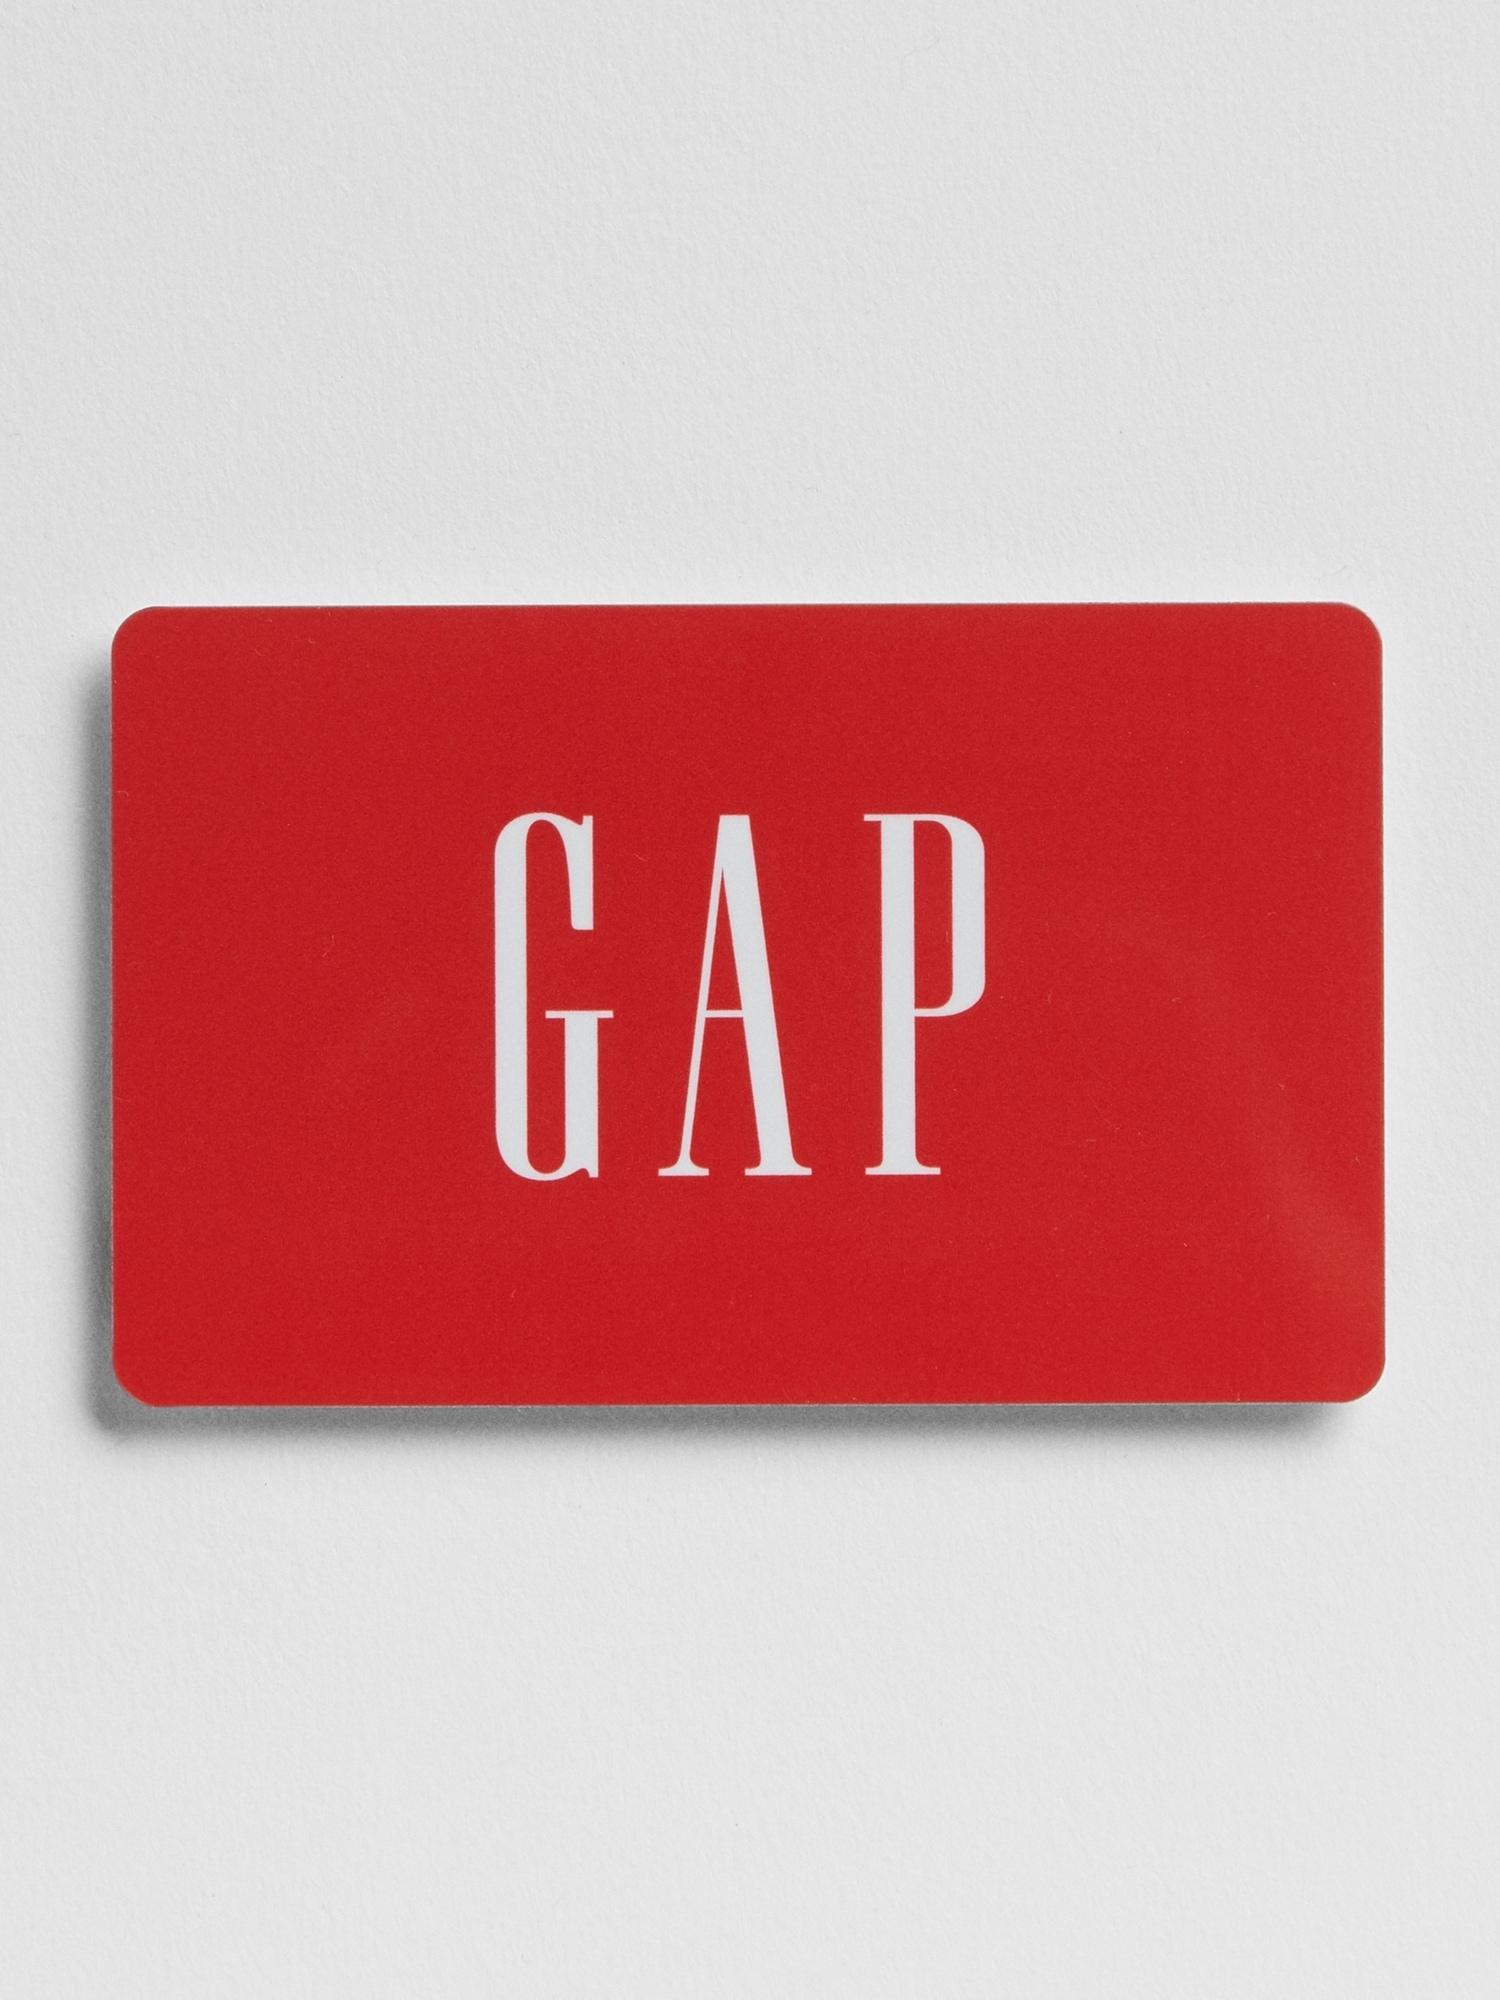 Gap brand meaning